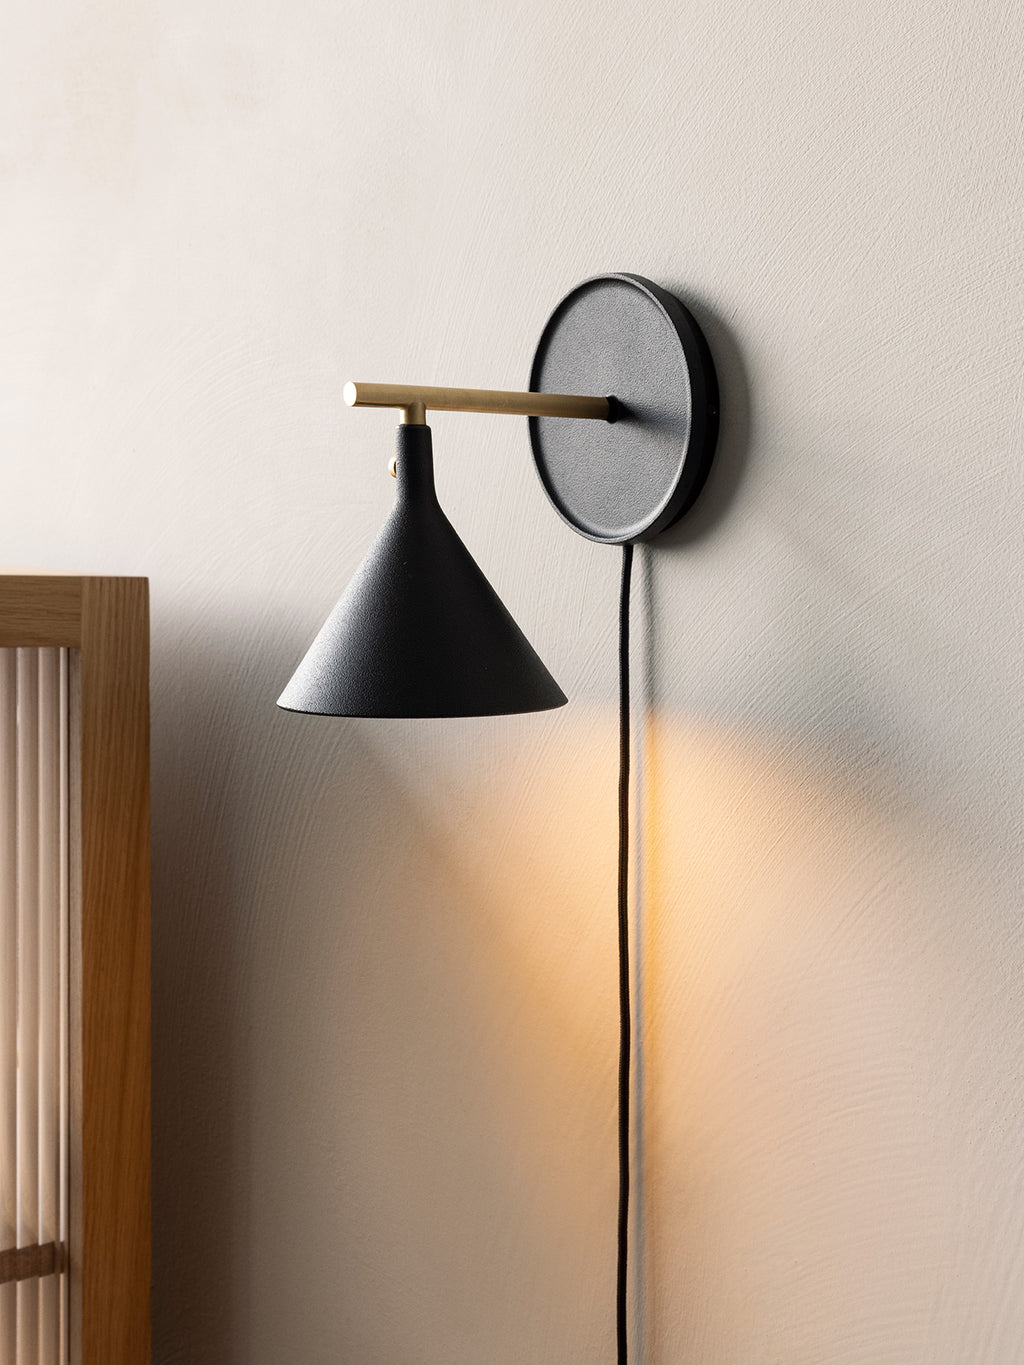 Vliegveld motief reservoir Cast Sconce Wall Lamp with Diffuser, Dimmable